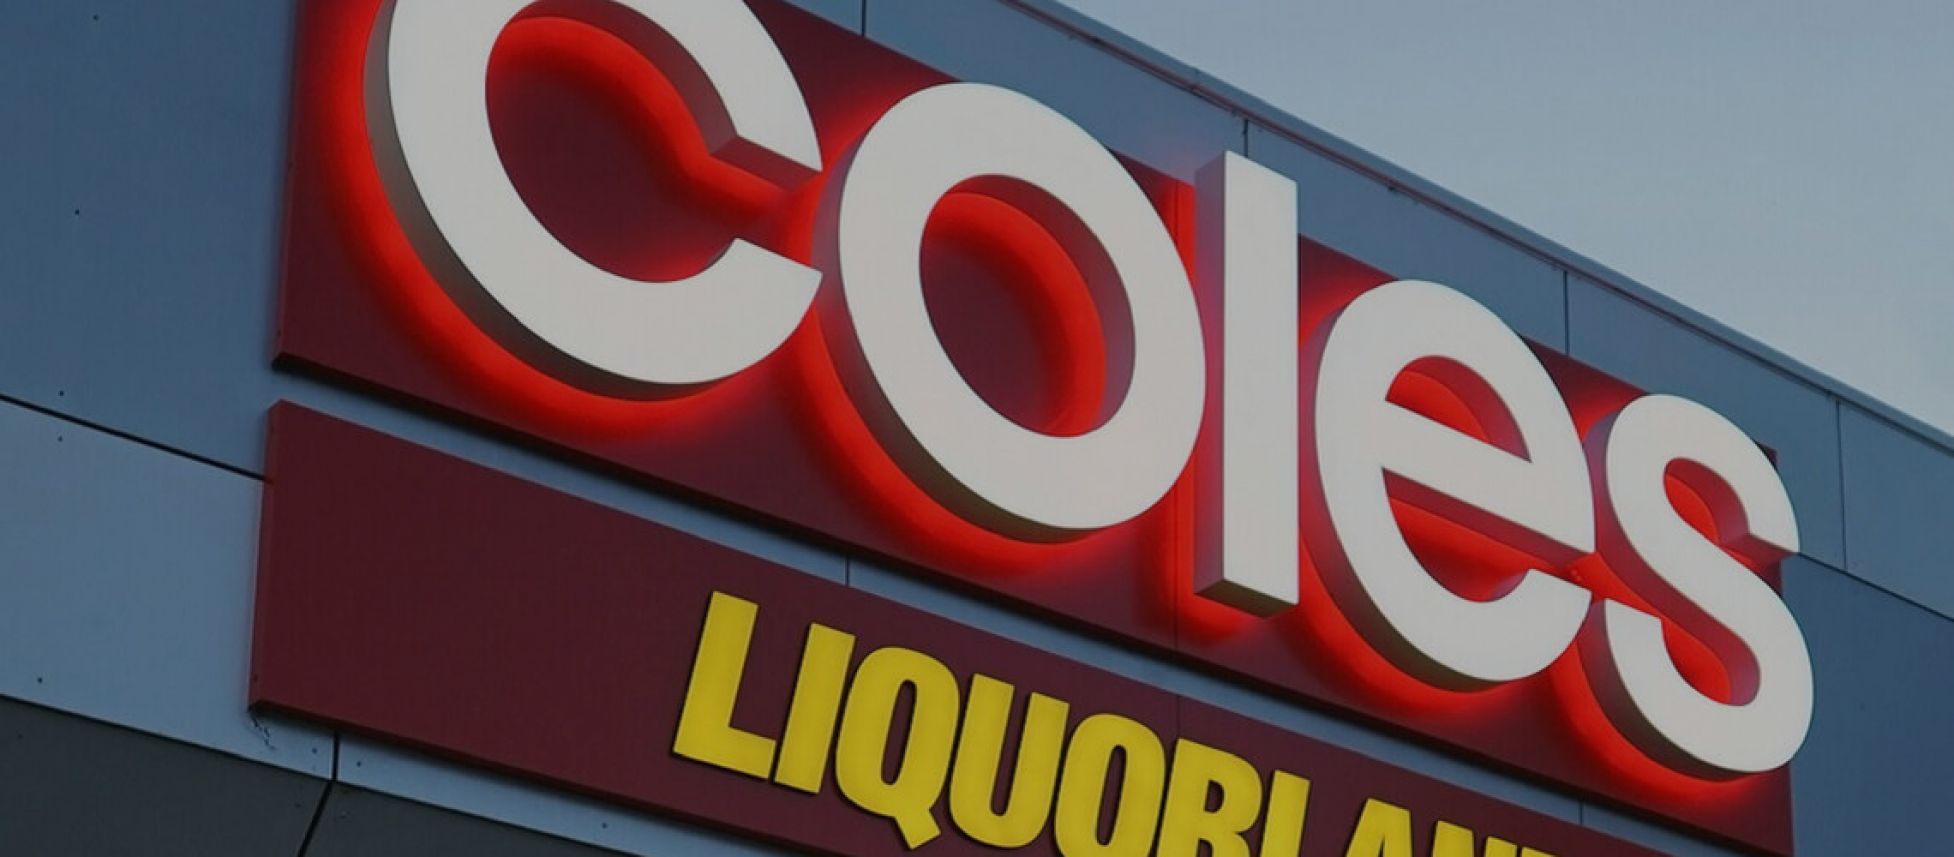 Photo for: Coles Targets Private Label Growth in $800m Transition